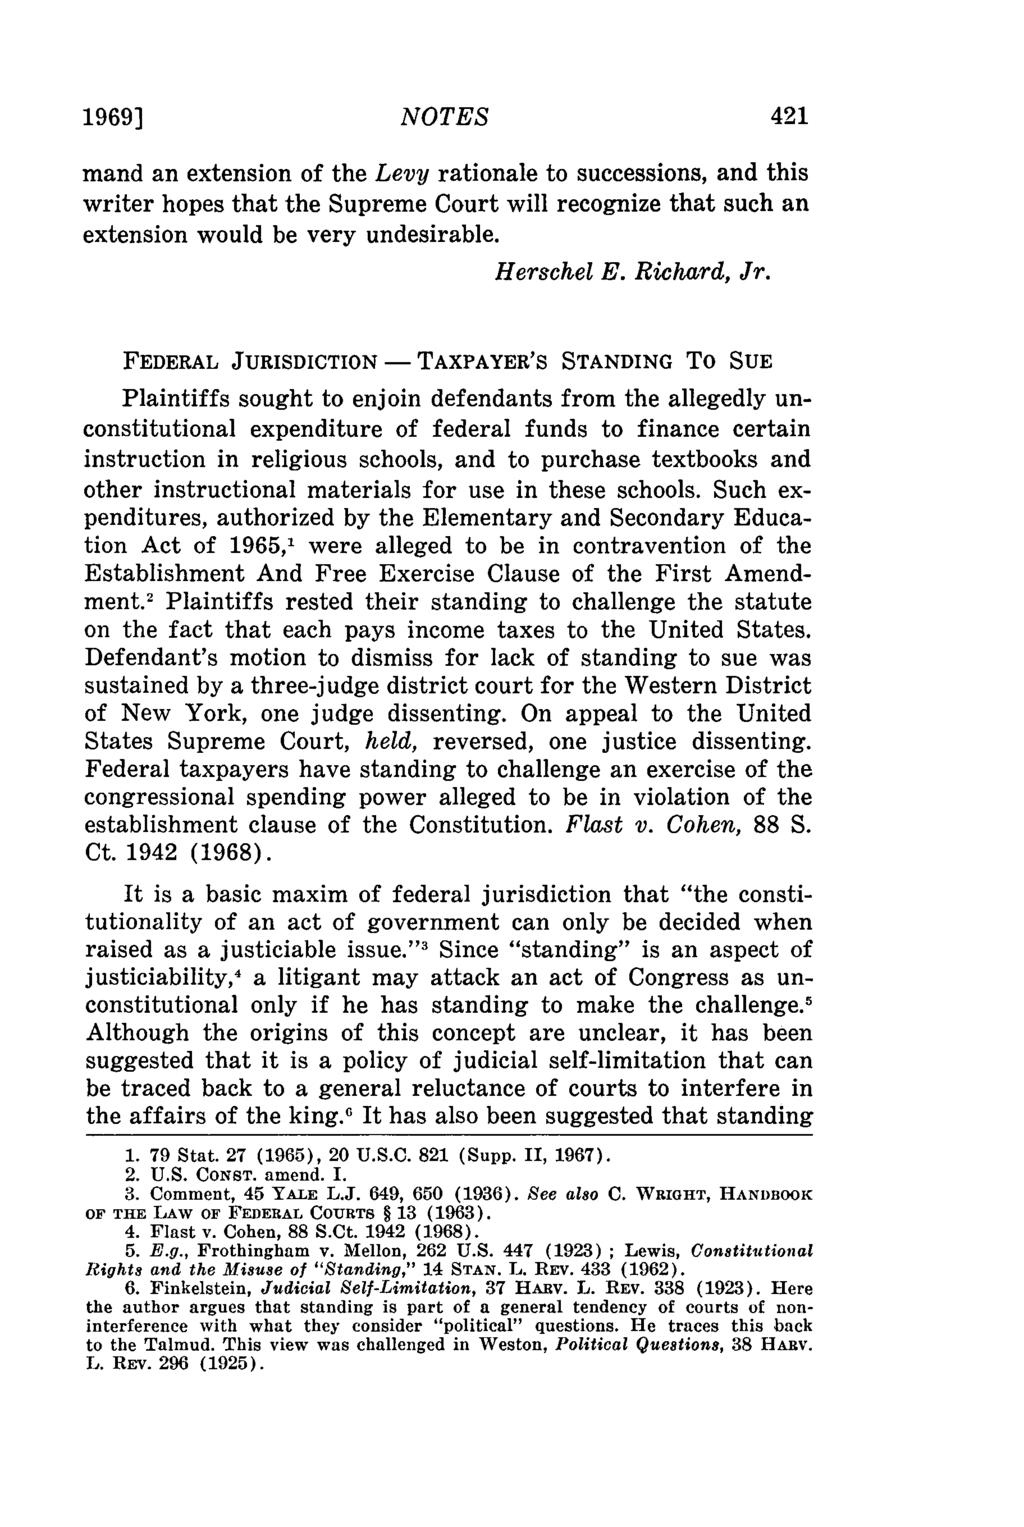 19691 NOTES mand an extension of the Levy rationale to successions, and this writer hopes that the Supreme Court will recognize that such an extension would be very undesirable. Herschel E.